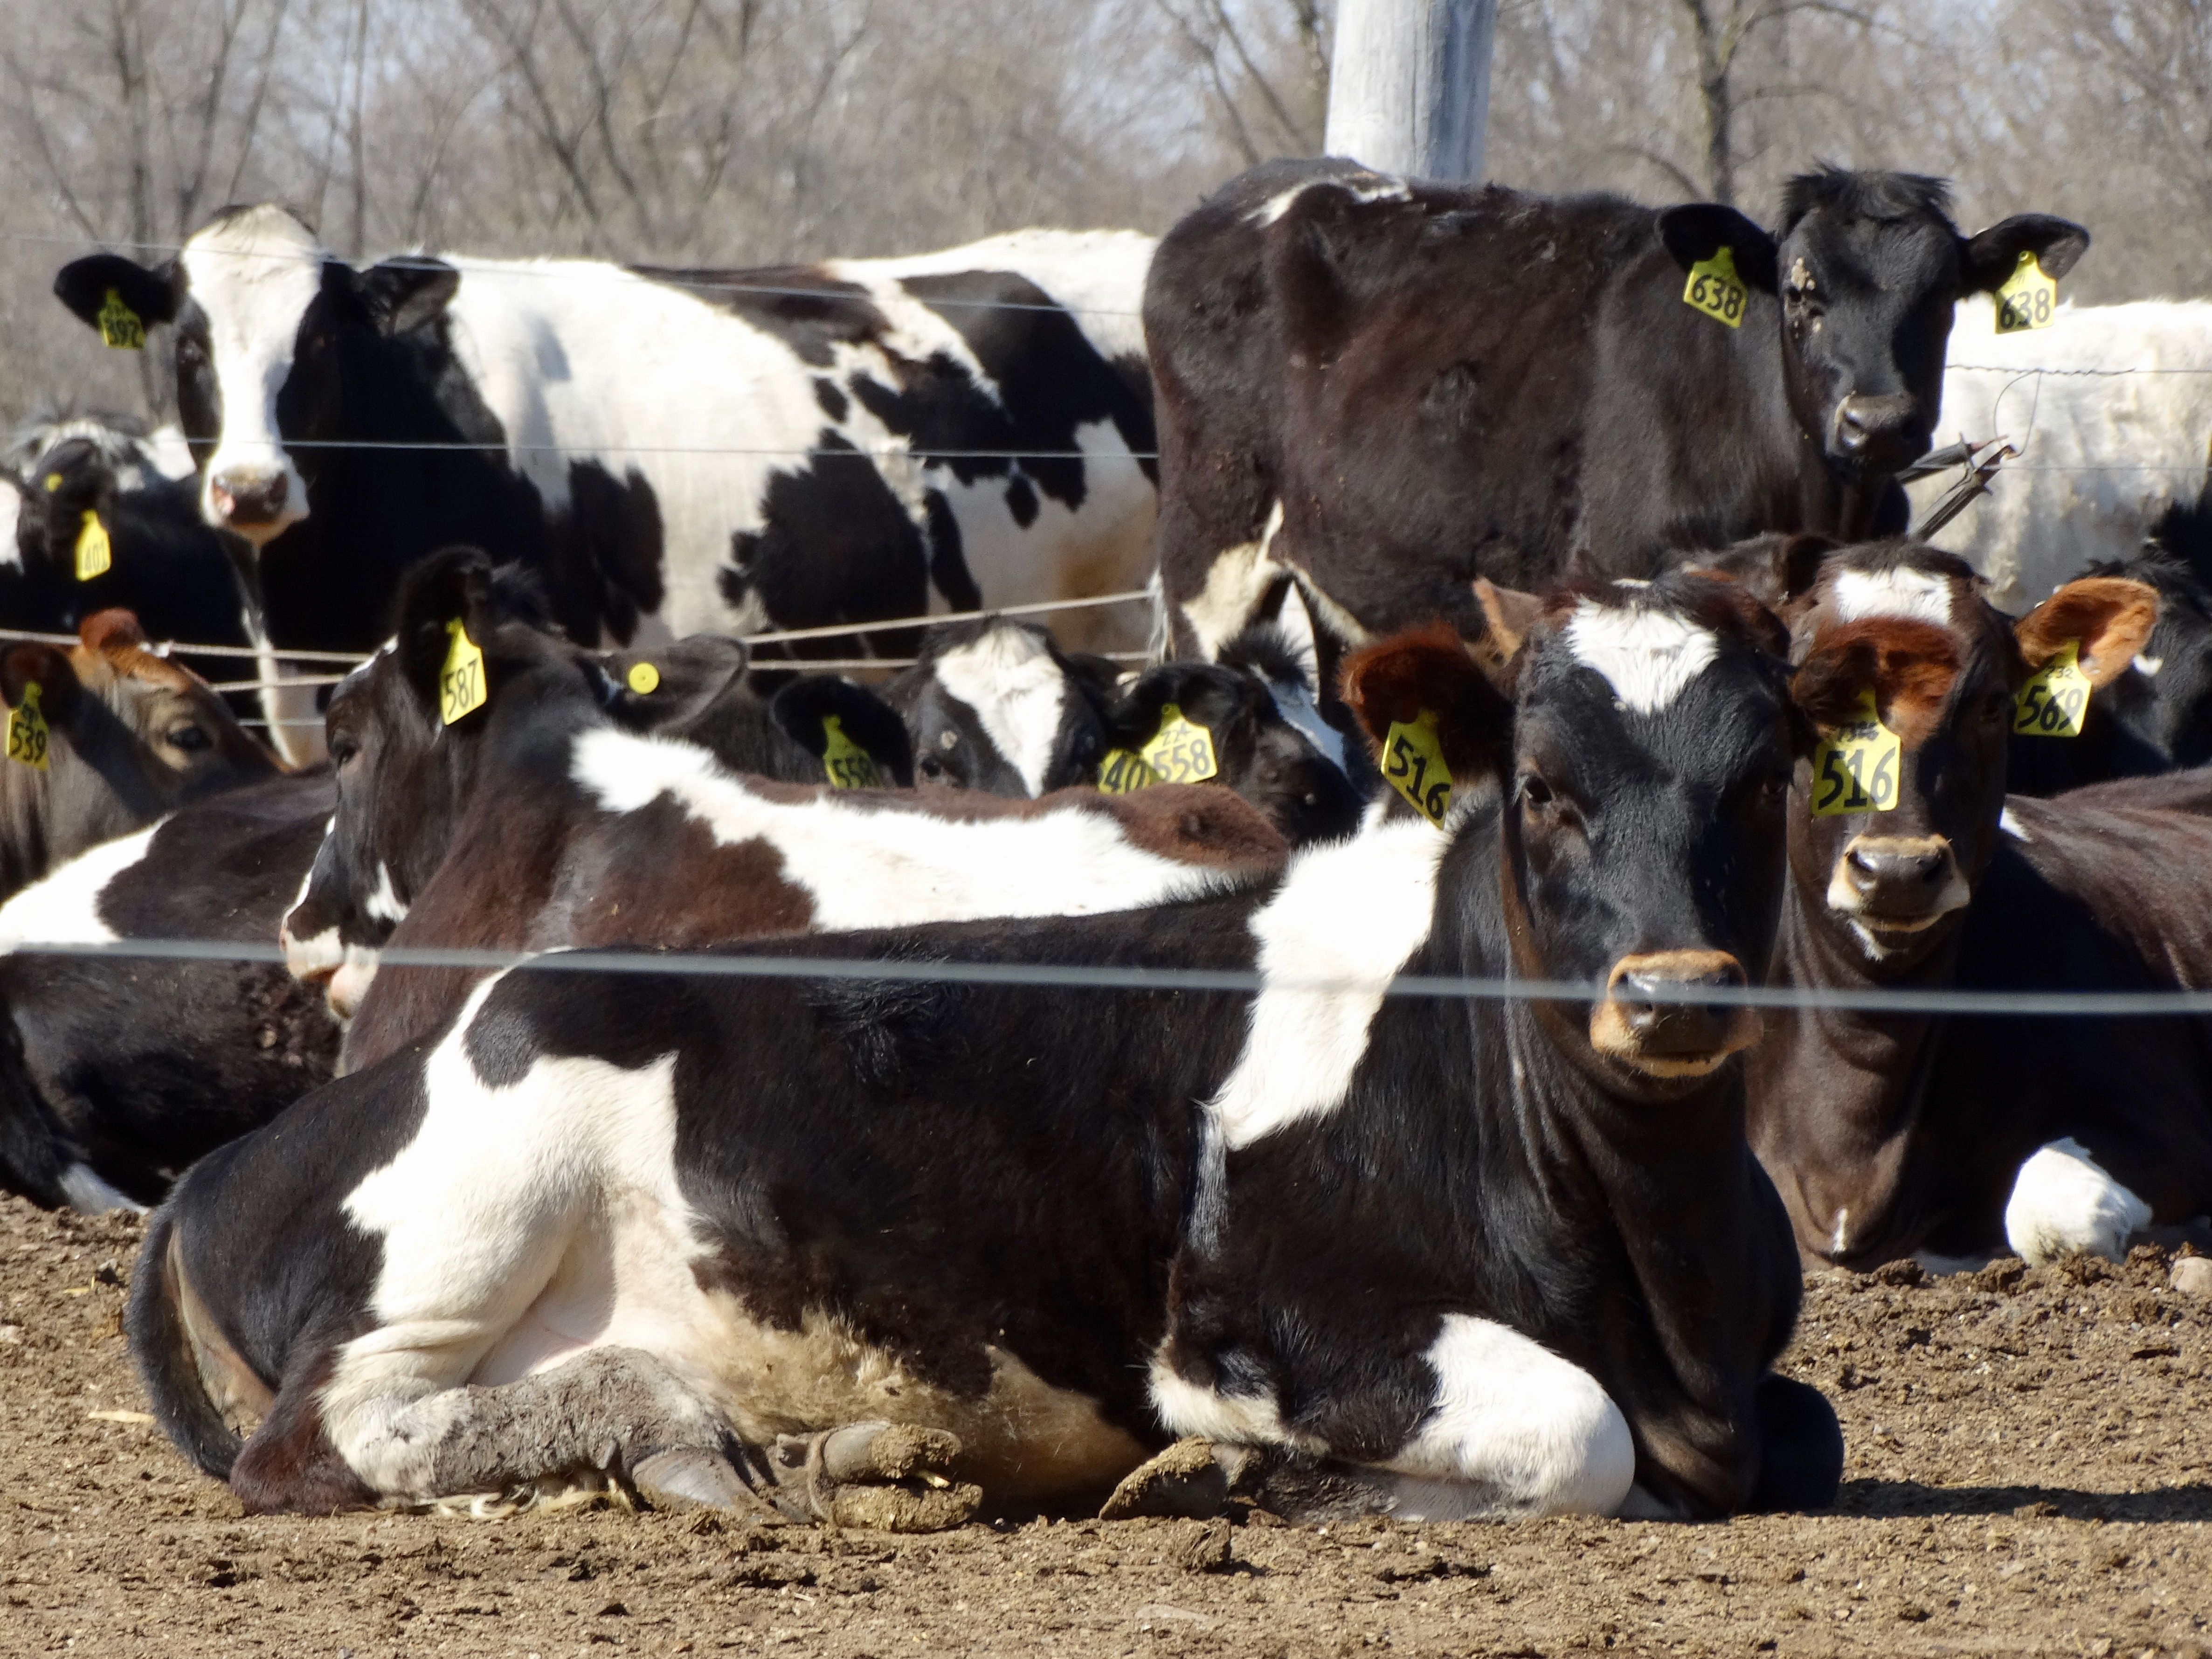 What are the Differences between Jersey and Holstein Cows? - United Dairy  Industry of Michigan